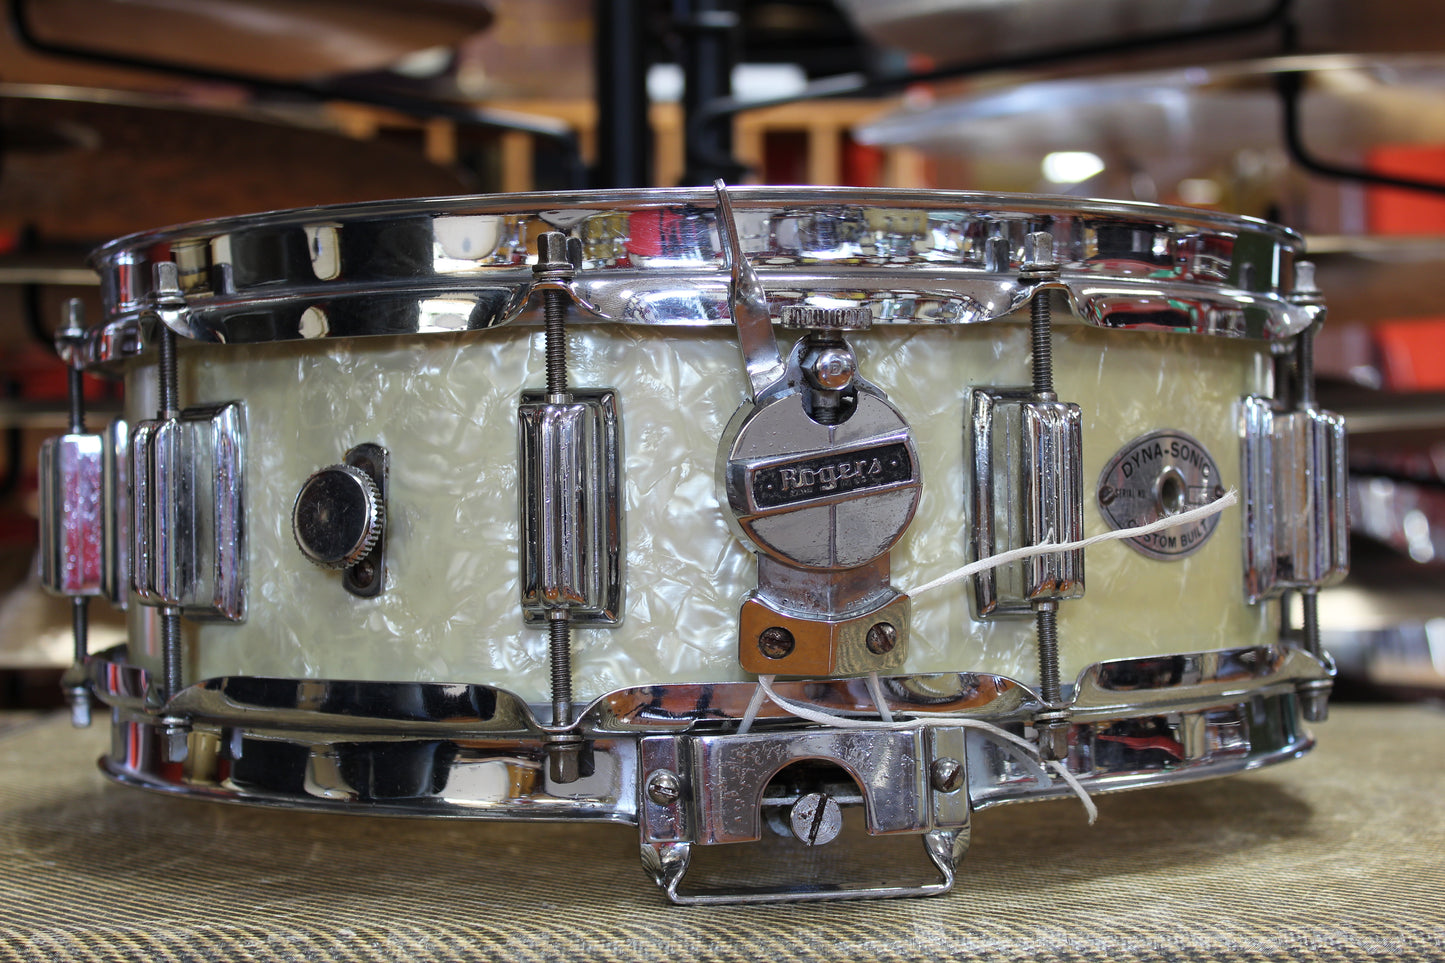 1960s Rogers Dynasonic Snare Drum 5"x14" in White Marine Pearl